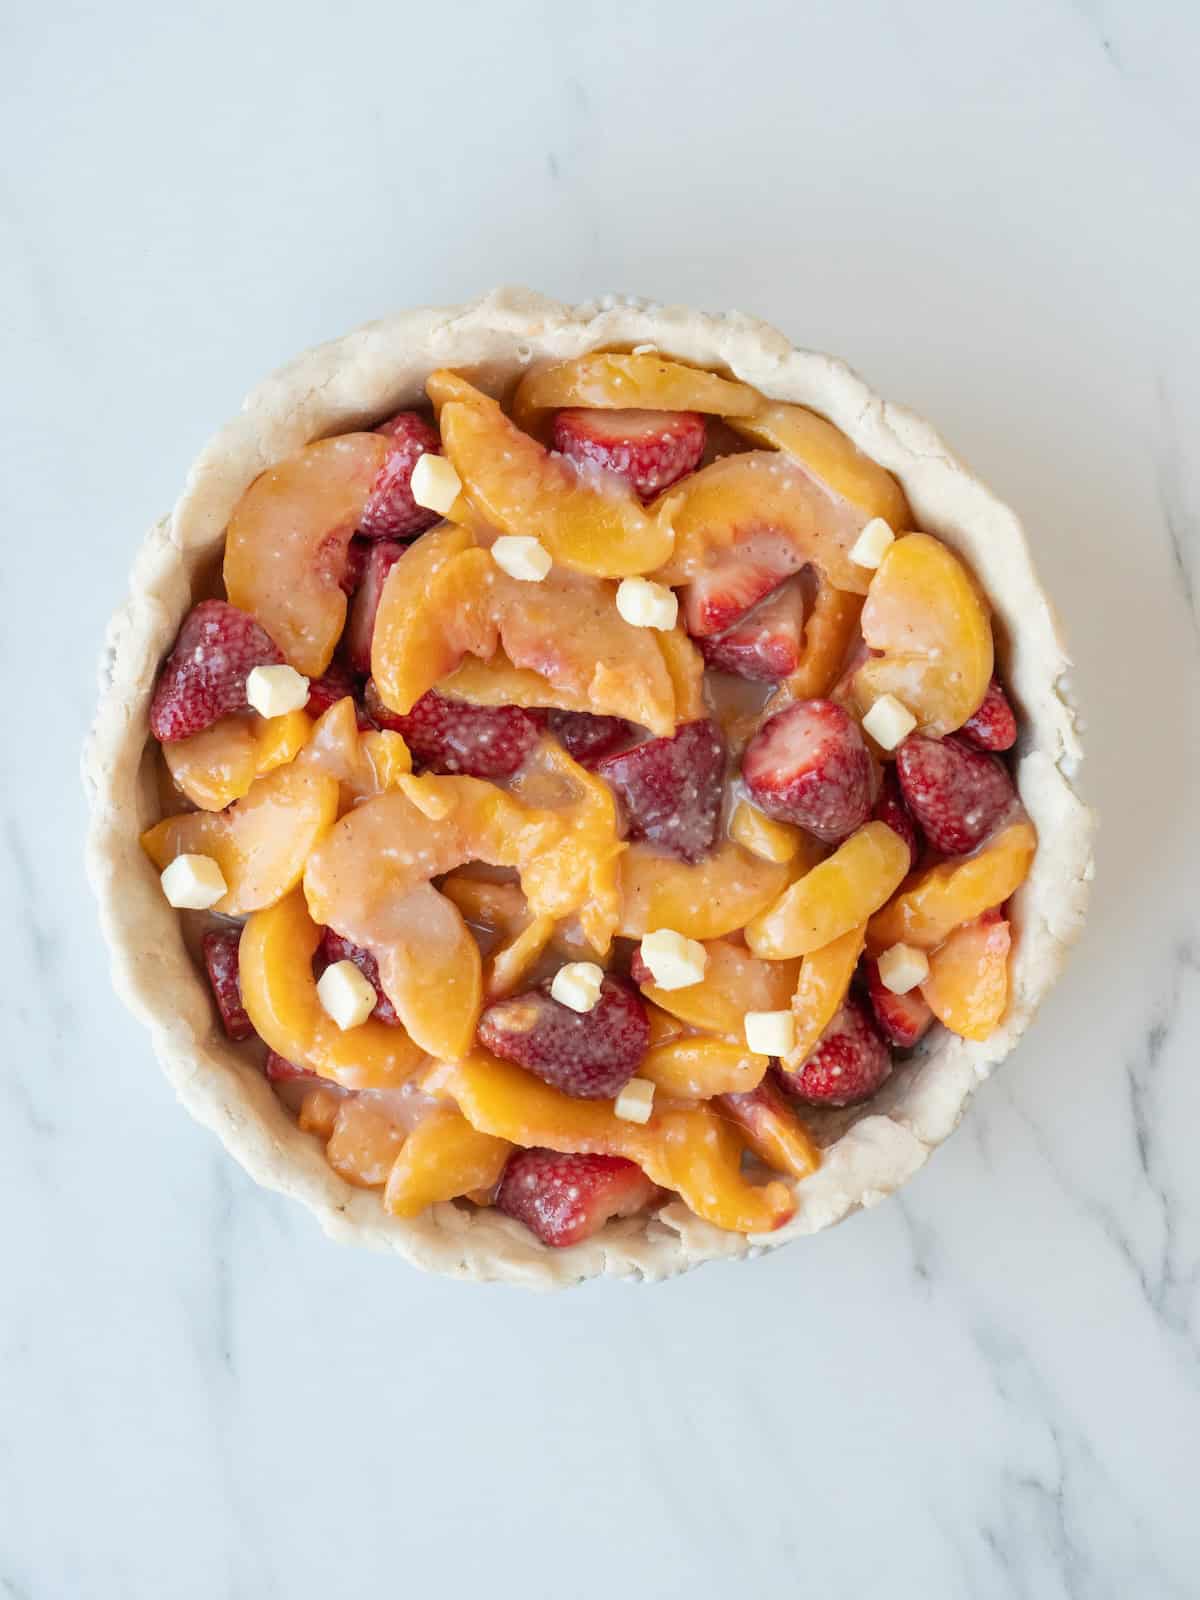 A pie pan lined with pie dough and filled with the strawberry-peach filling, and then dotted with little pieces of butter.